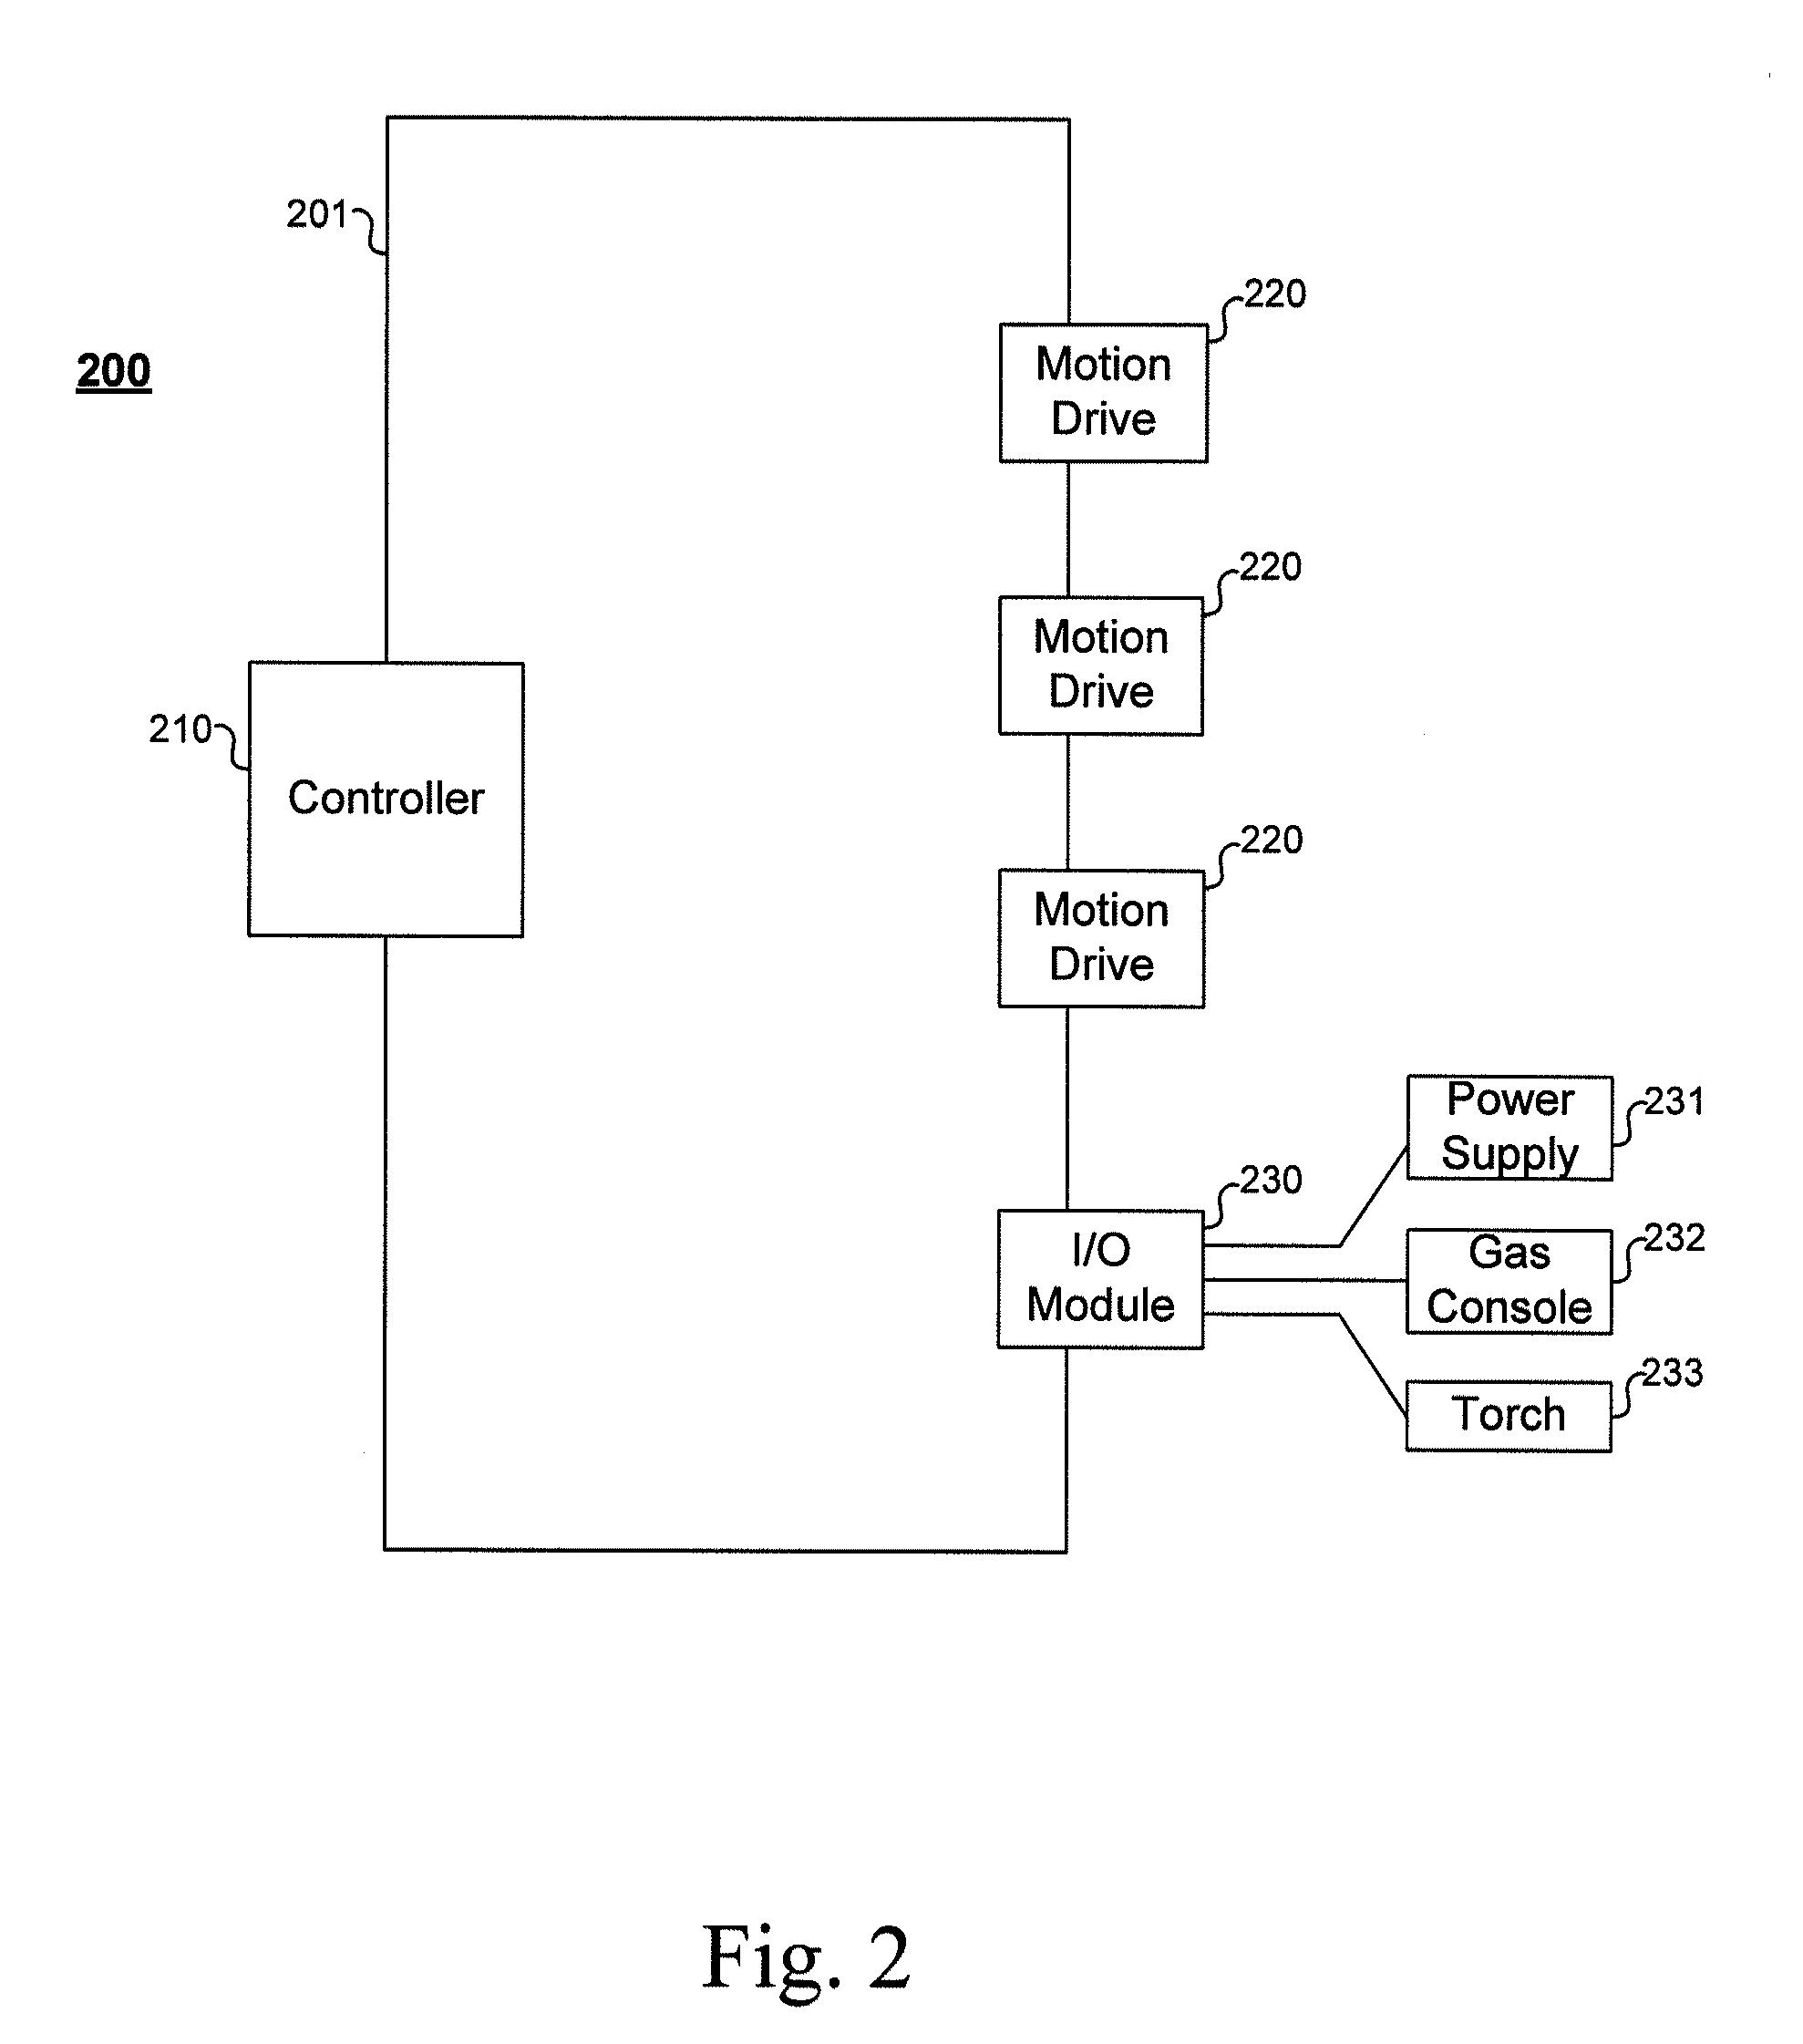 Networking architecture for thermal processing system